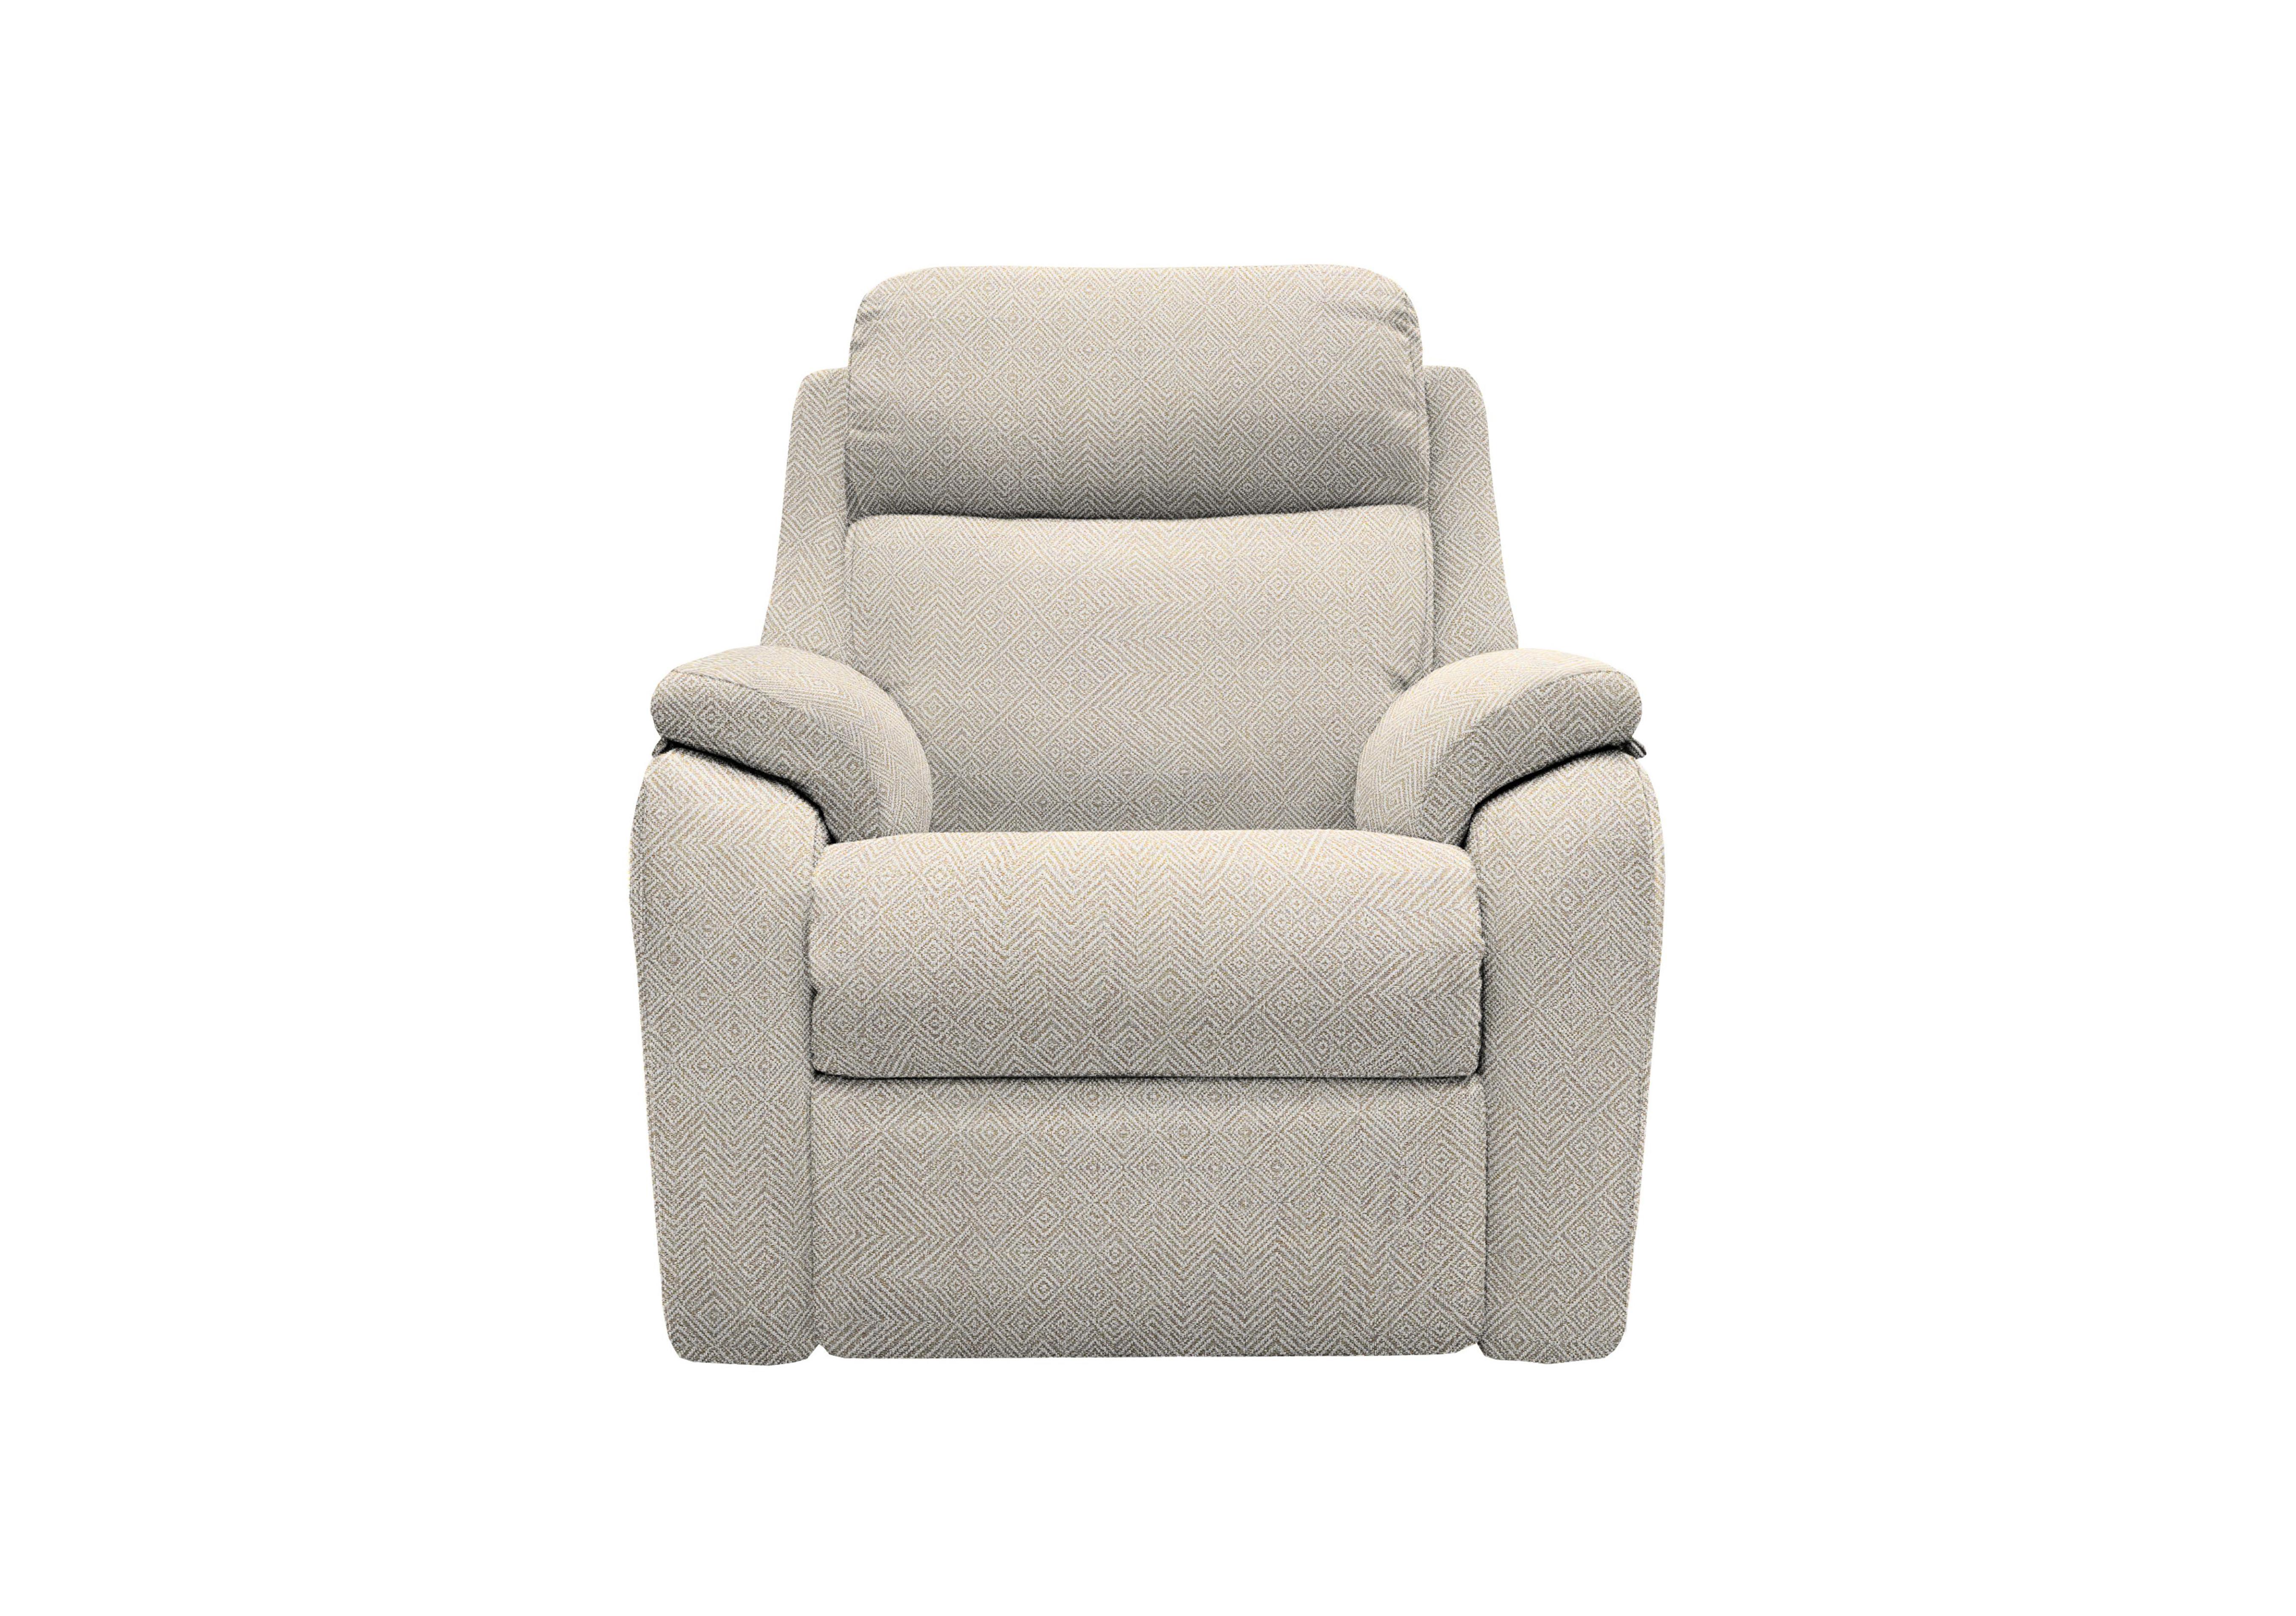 Kingsbury Fabric Power Recliner Armchair with Power Headrests in B011 Nebular Blush on Furniture Village